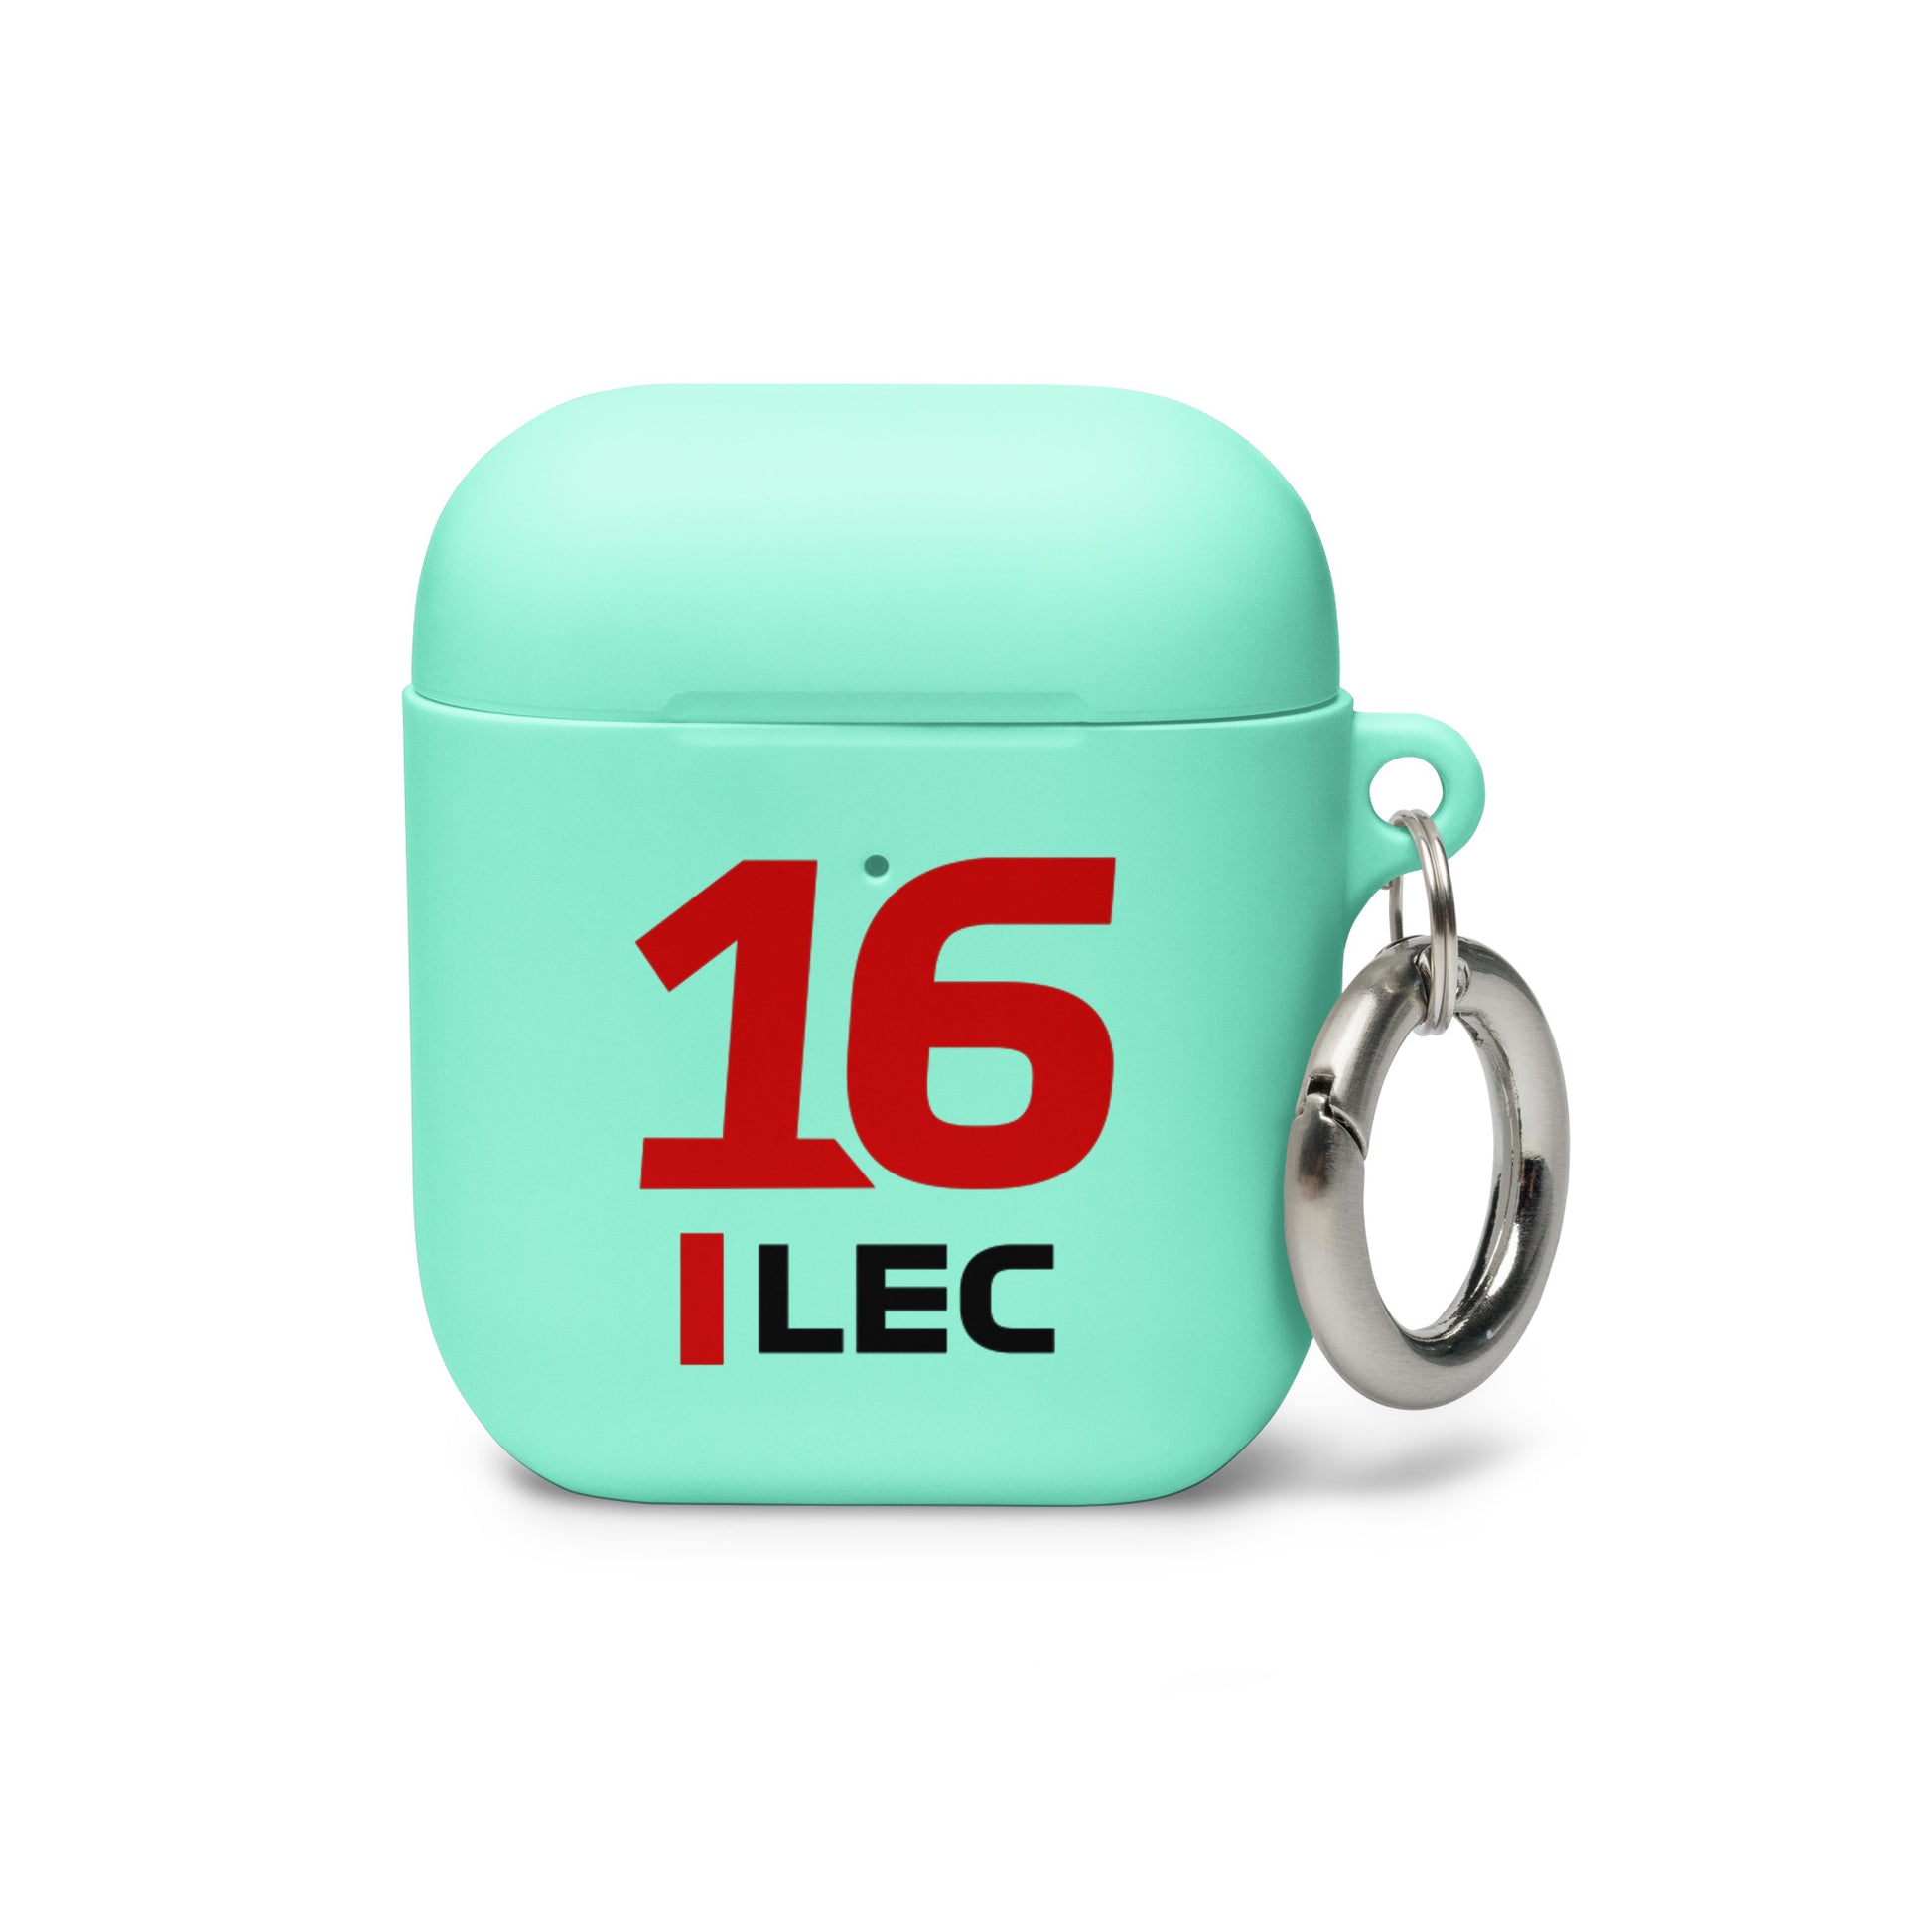 Charles Leclerc AirPods Case mint blue